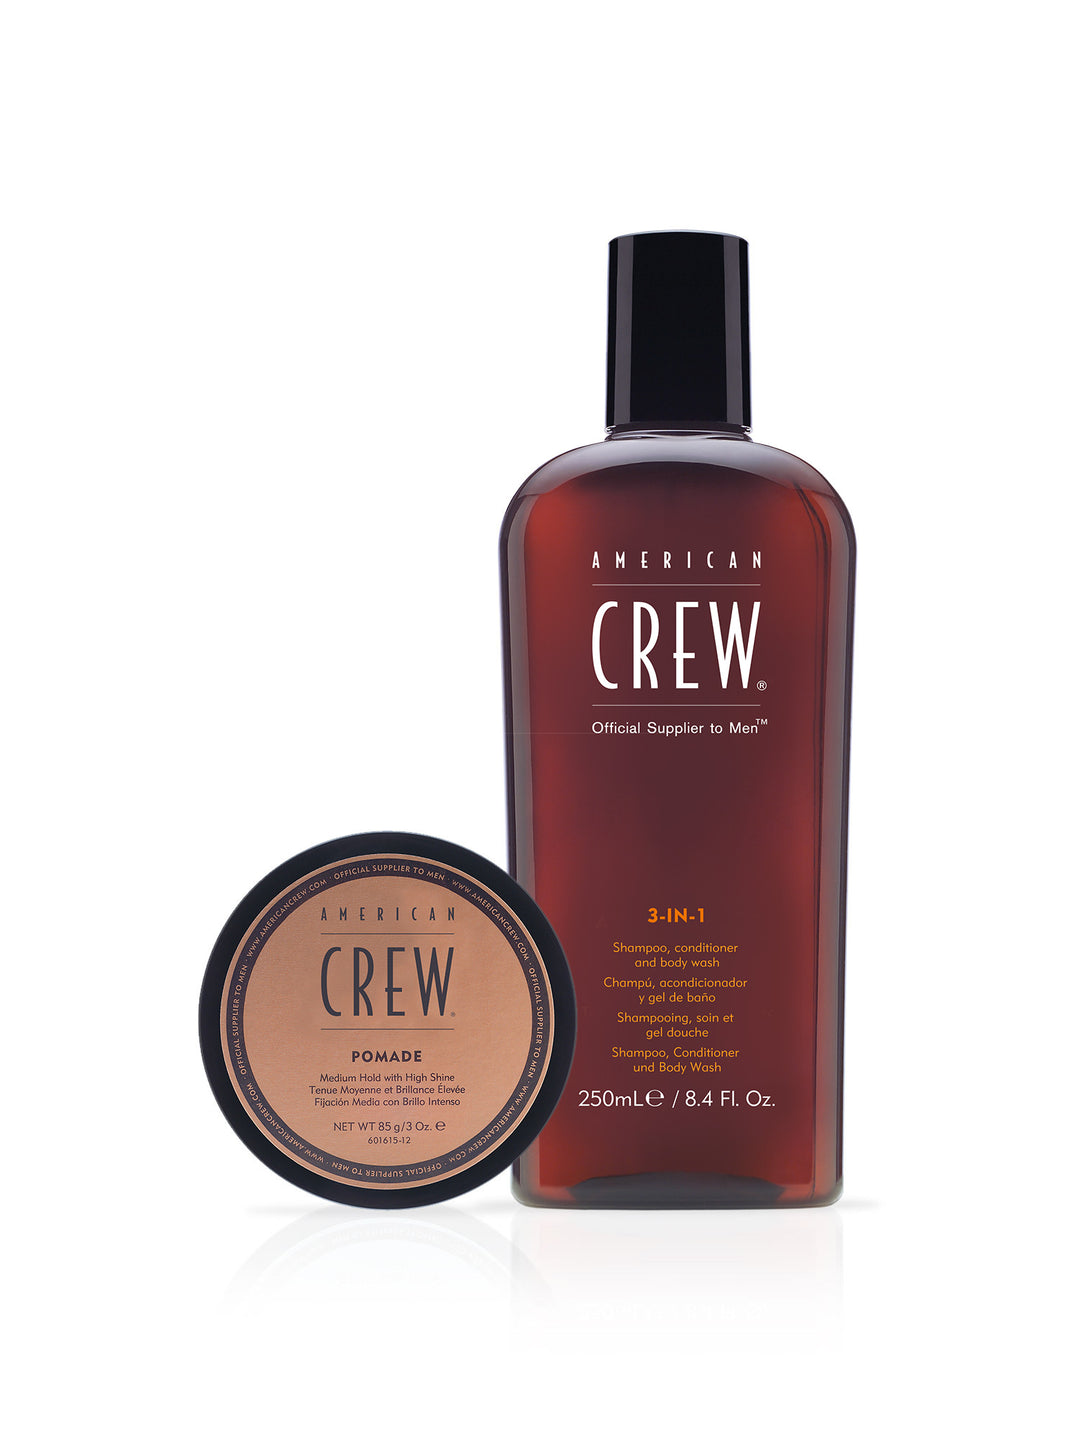 Hair and - Pomade, American Products Cream, Crew Hair Gel, Styling